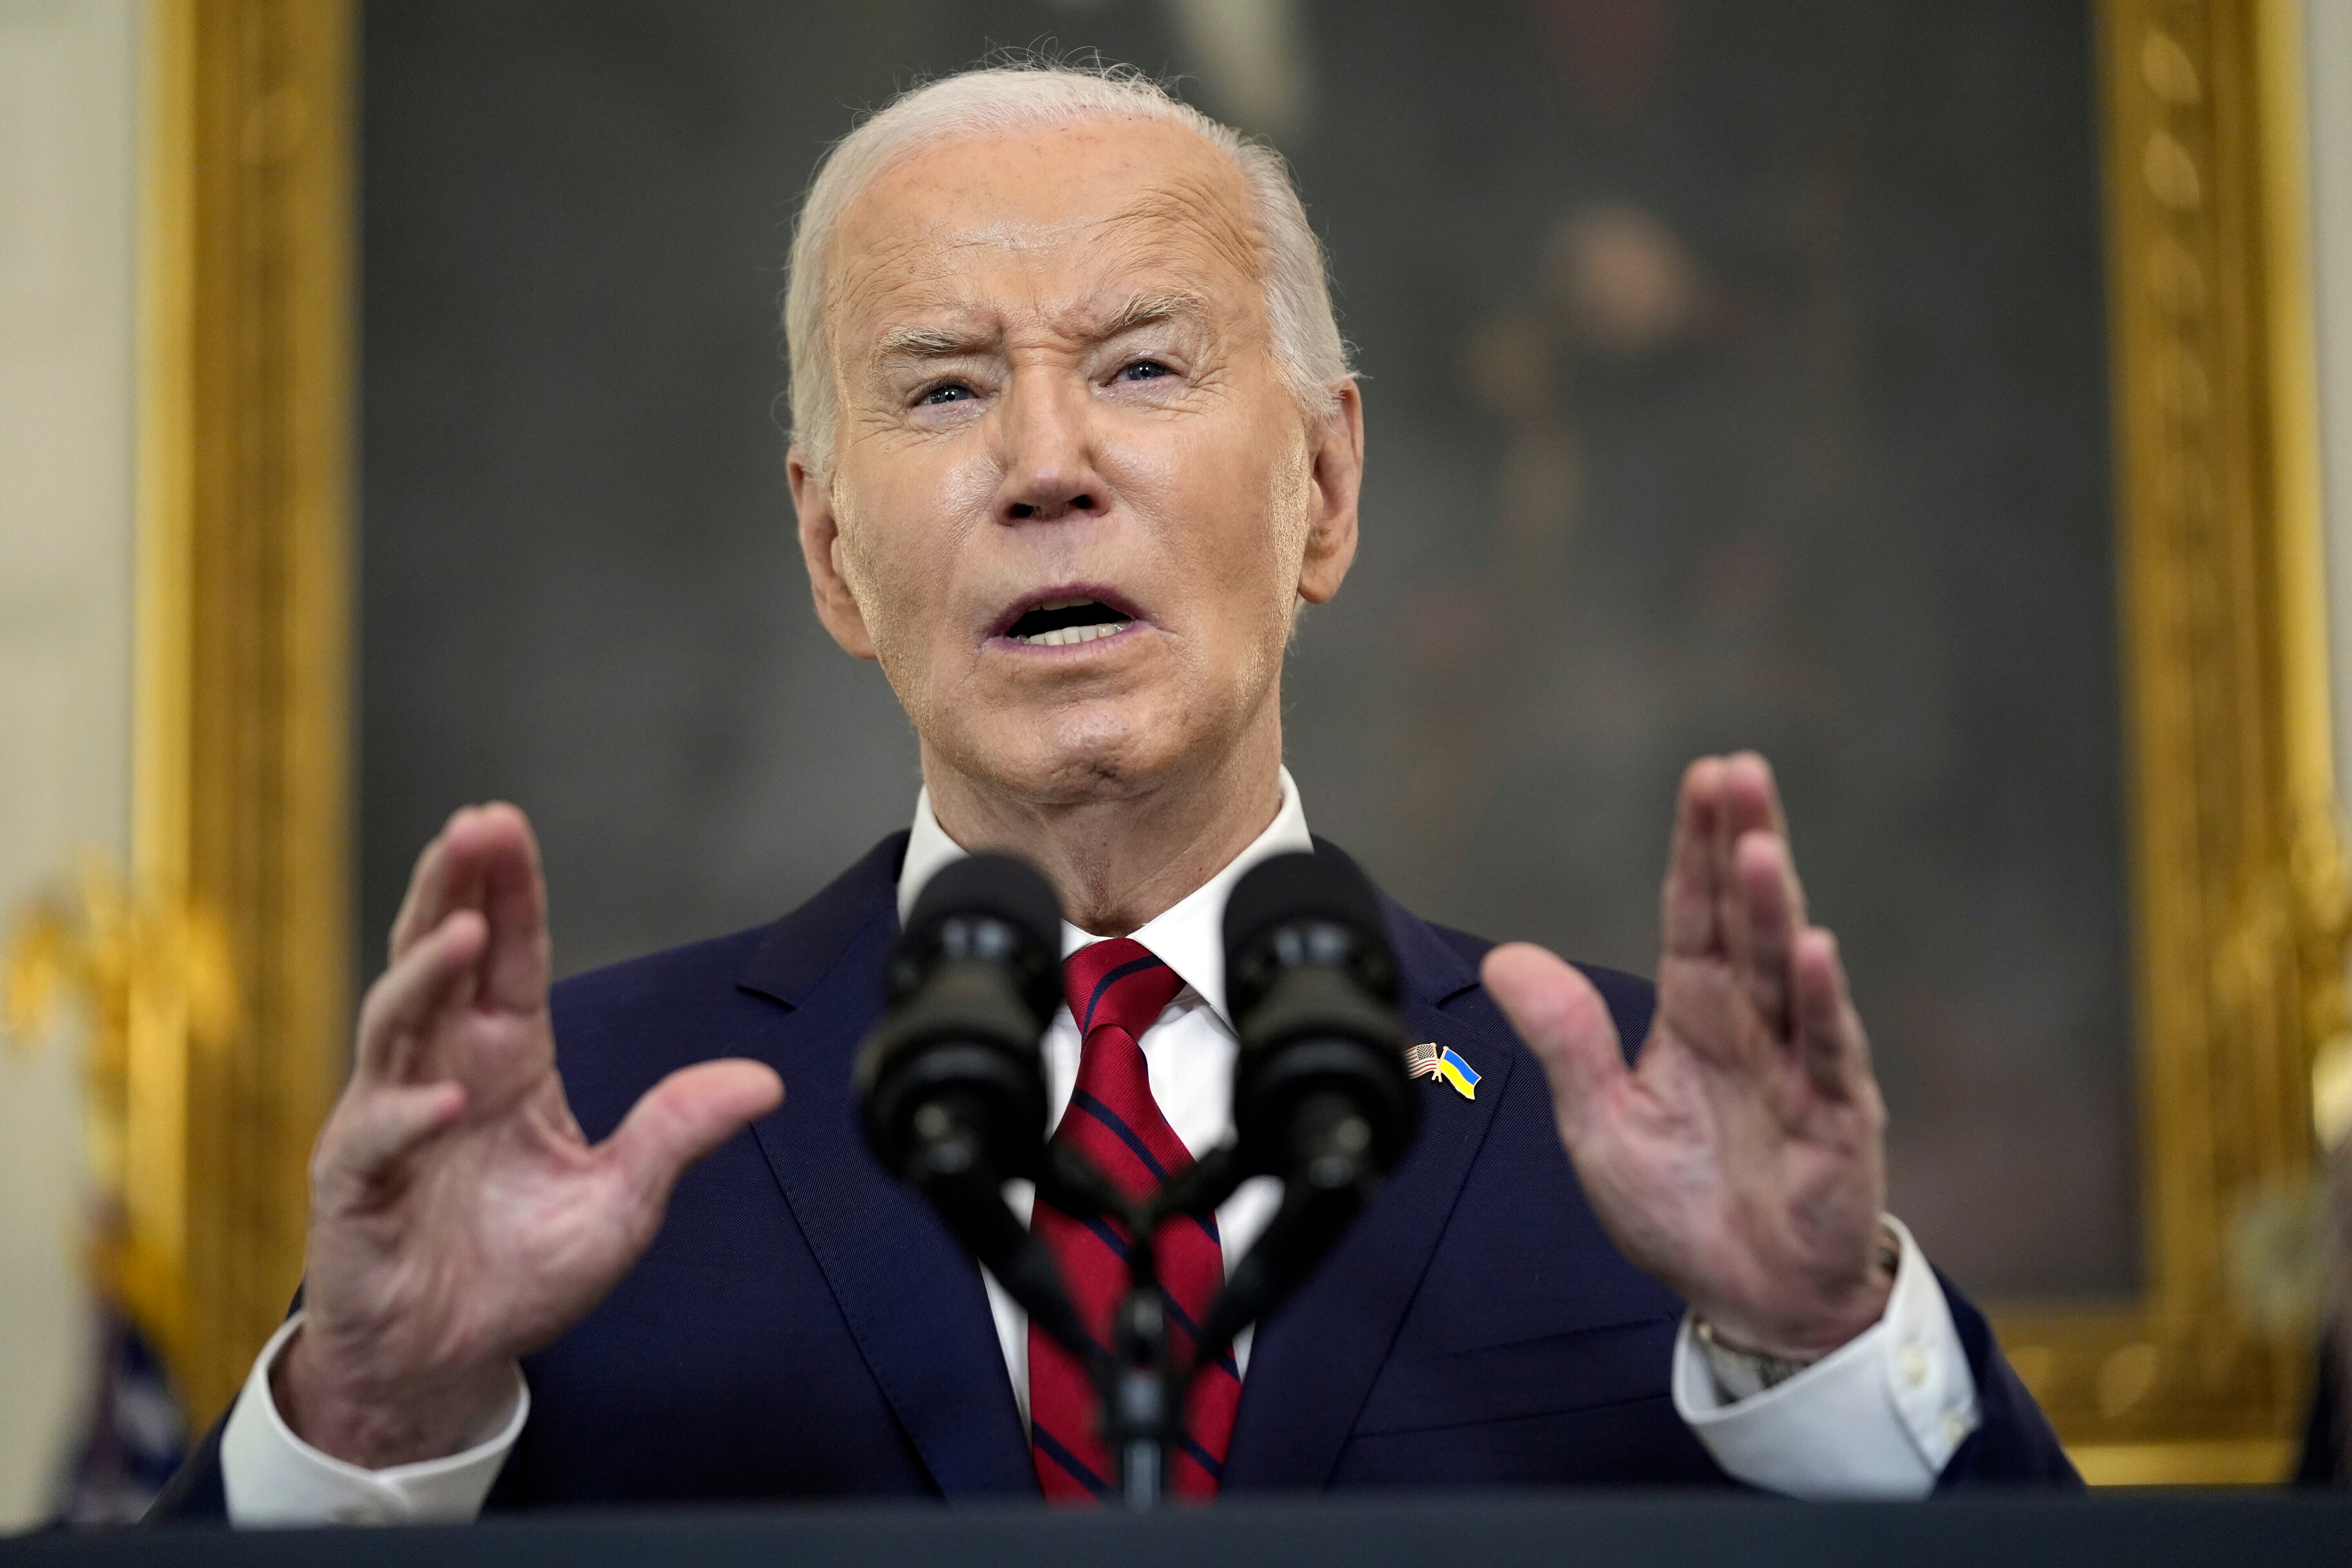 The consequential stance Joe Biden took, and continues to take, with Israel will come back to haunt him